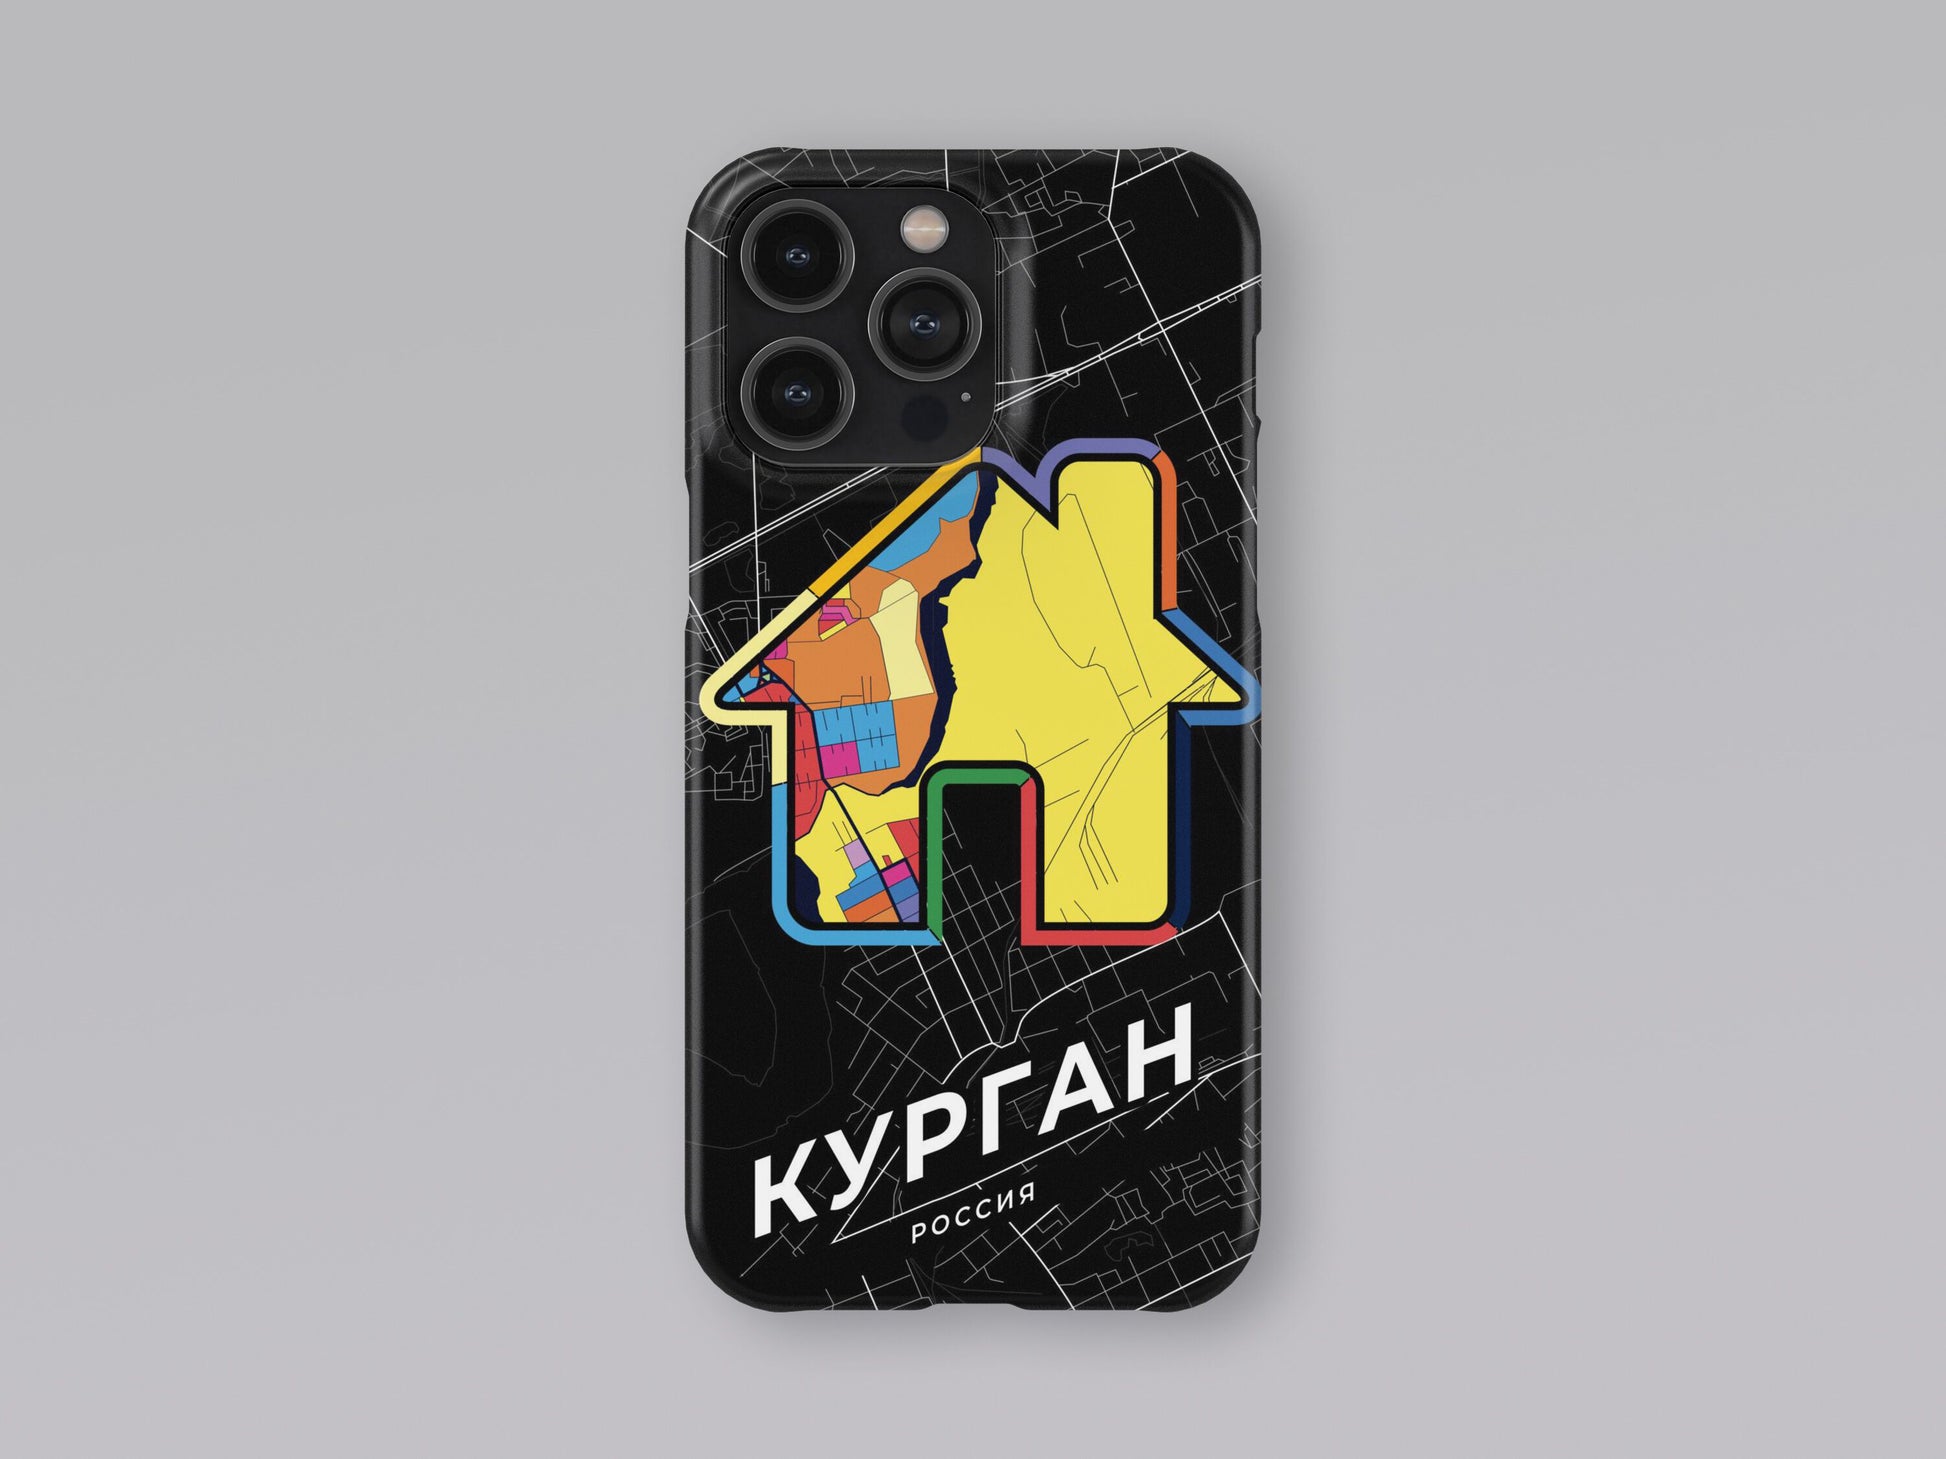 Kurgan Russia slim phone case with colorful icon. Birthday, wedding or housewarming gift. Couple match cases. 3